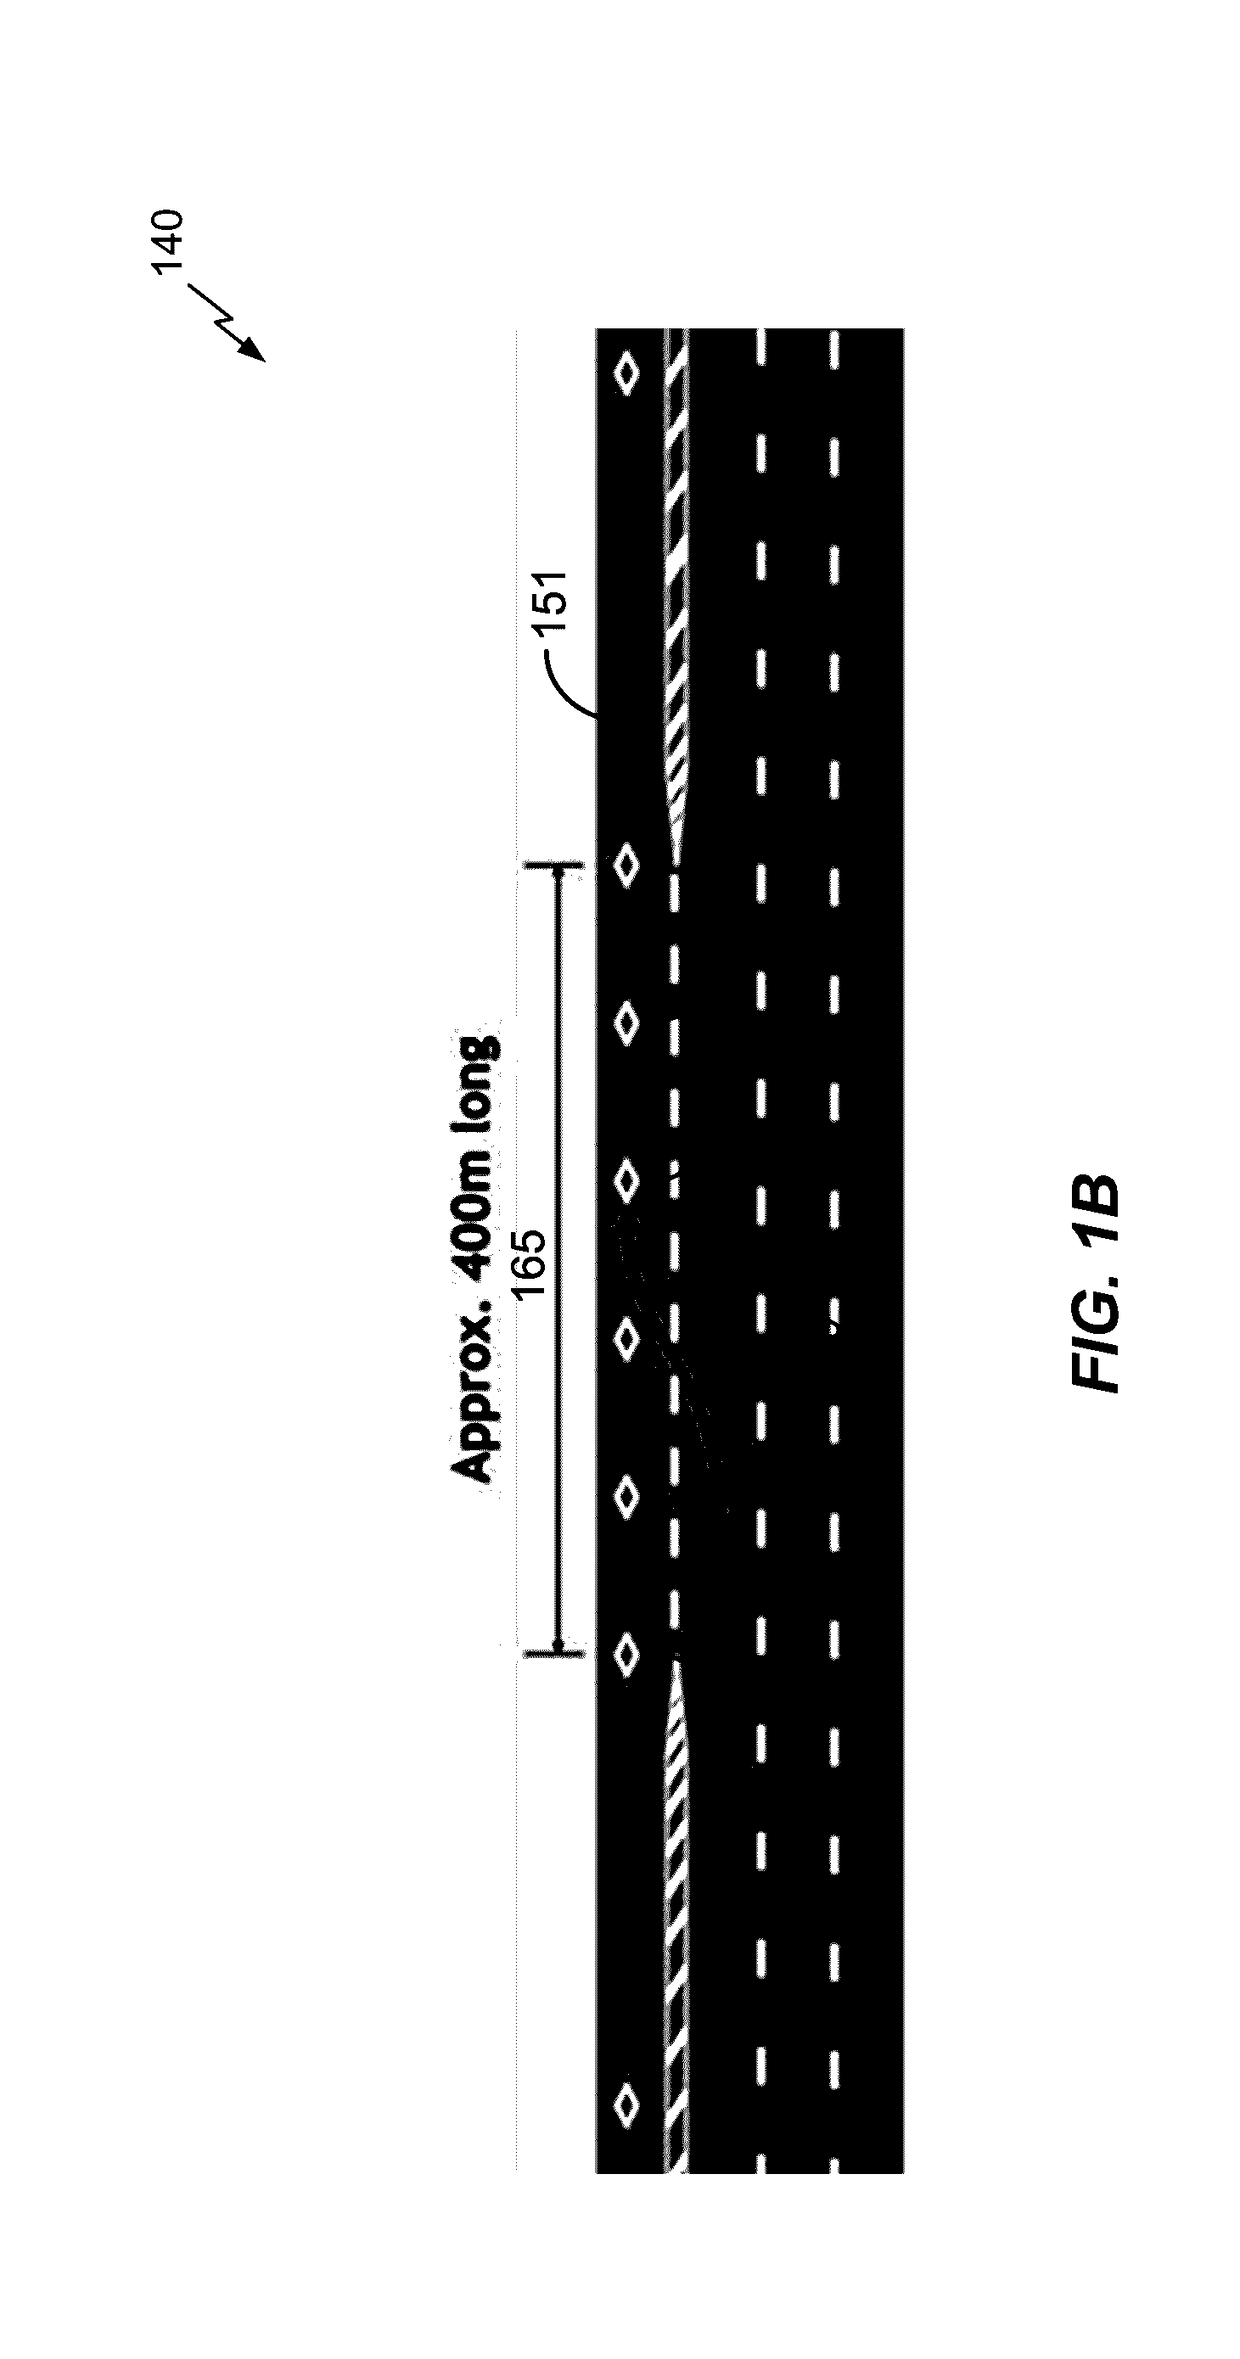 Methods and systems for electronically assisted lane entrance